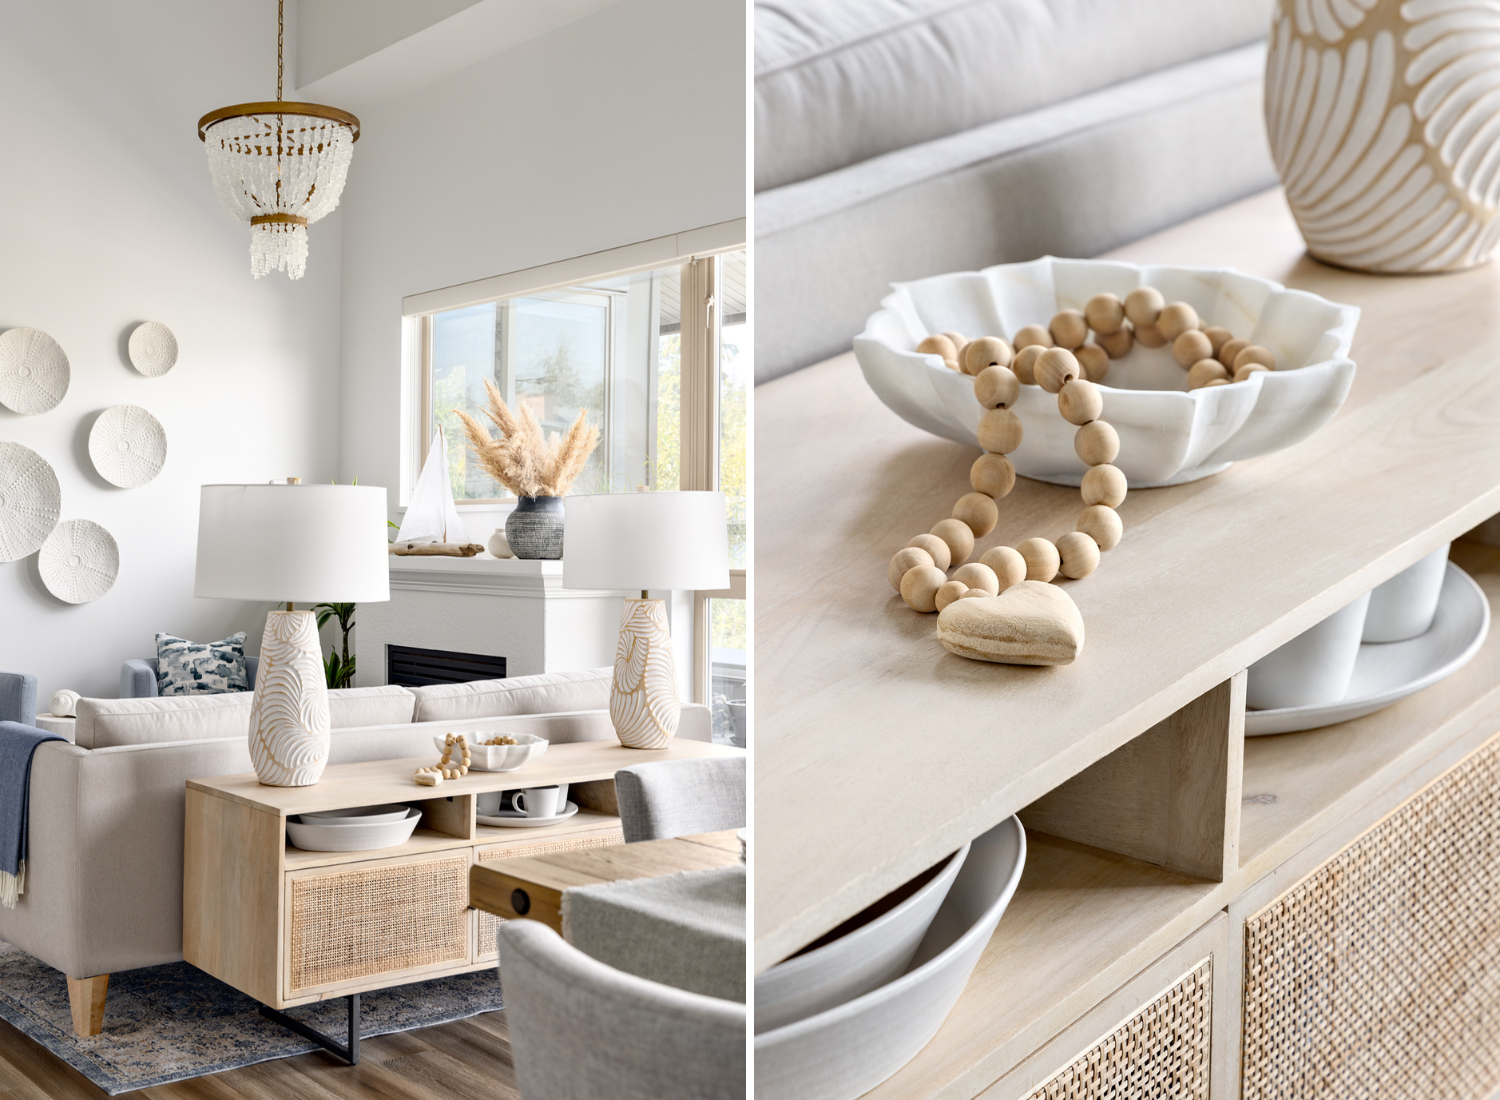 Simply Home-Vancouver-Ravenswoods-Furniture-Living Room-Chandelier-Rattan-Decor-Oak-Textured Lamps